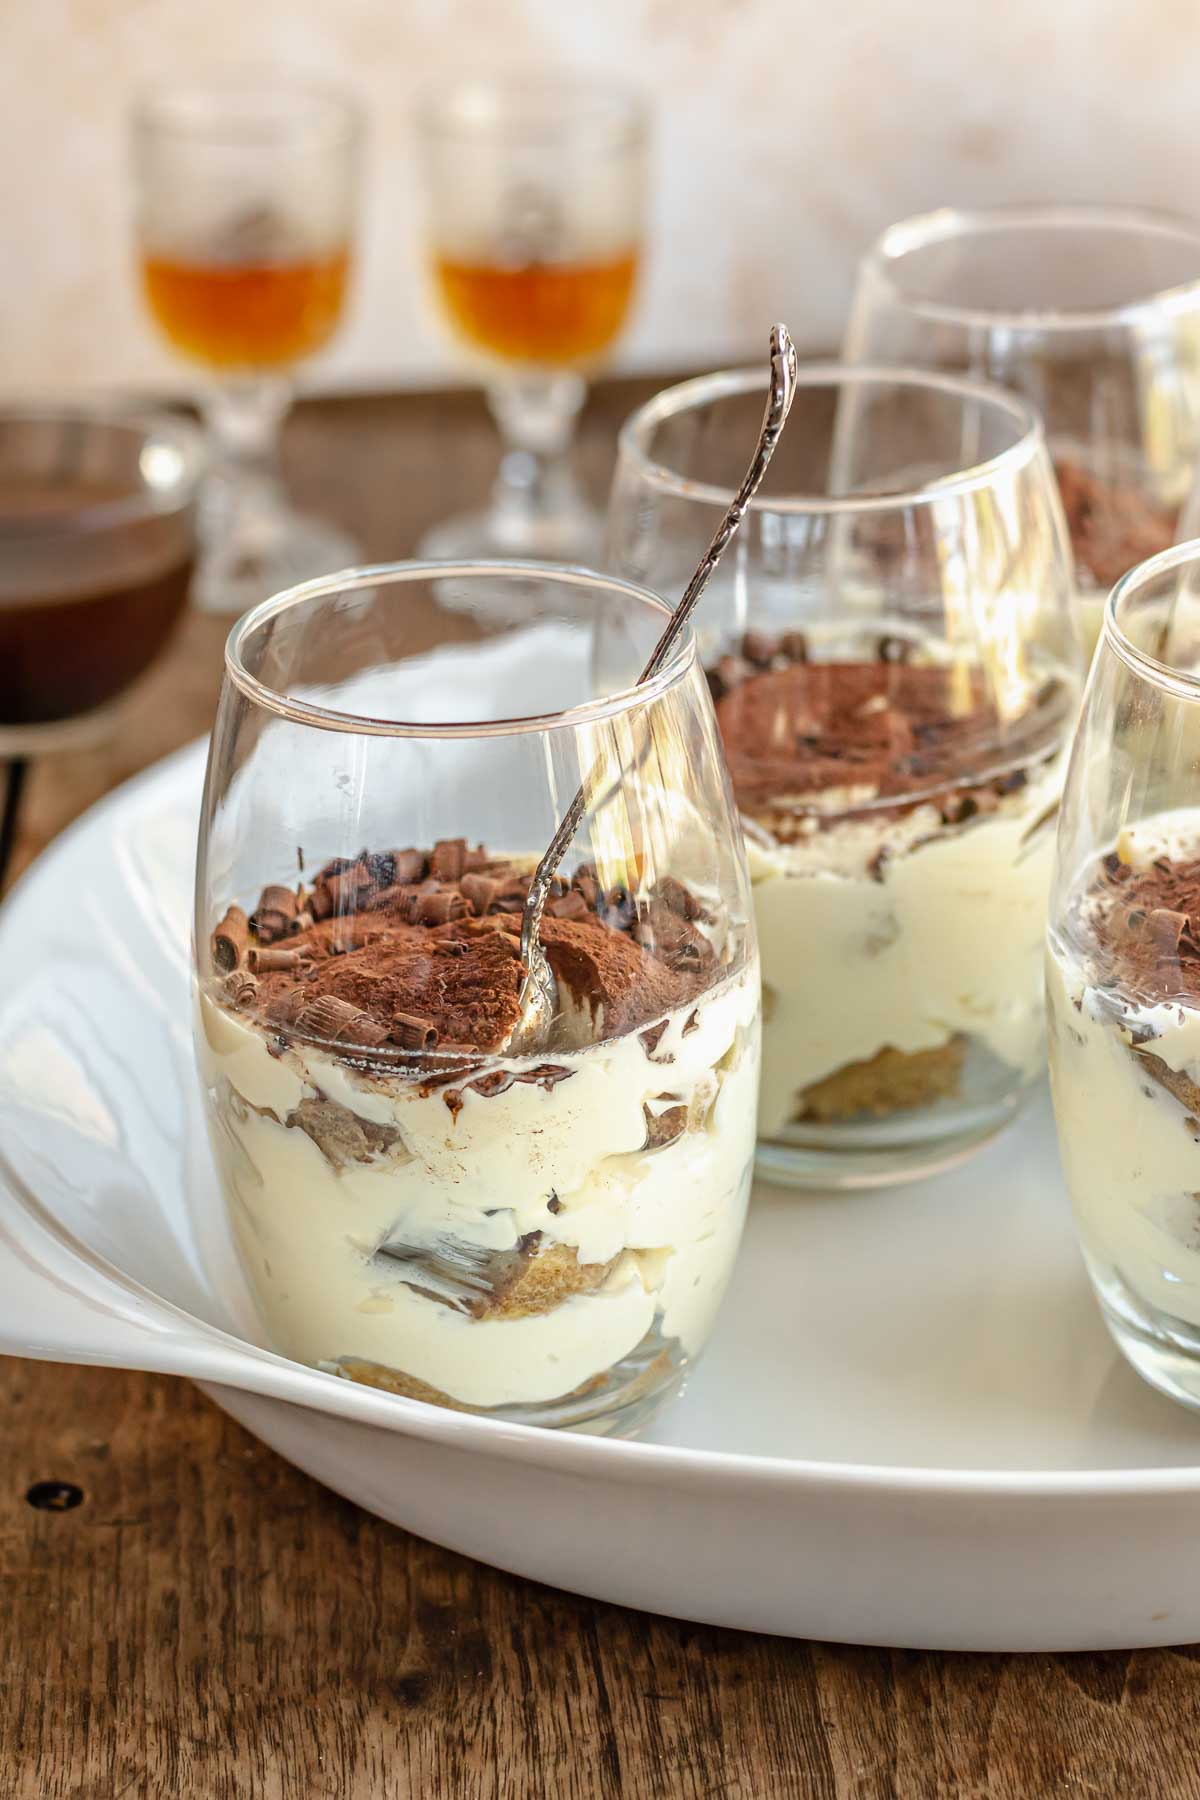 Tiramisu cups on a platter. Rum in glasses sit in the background.